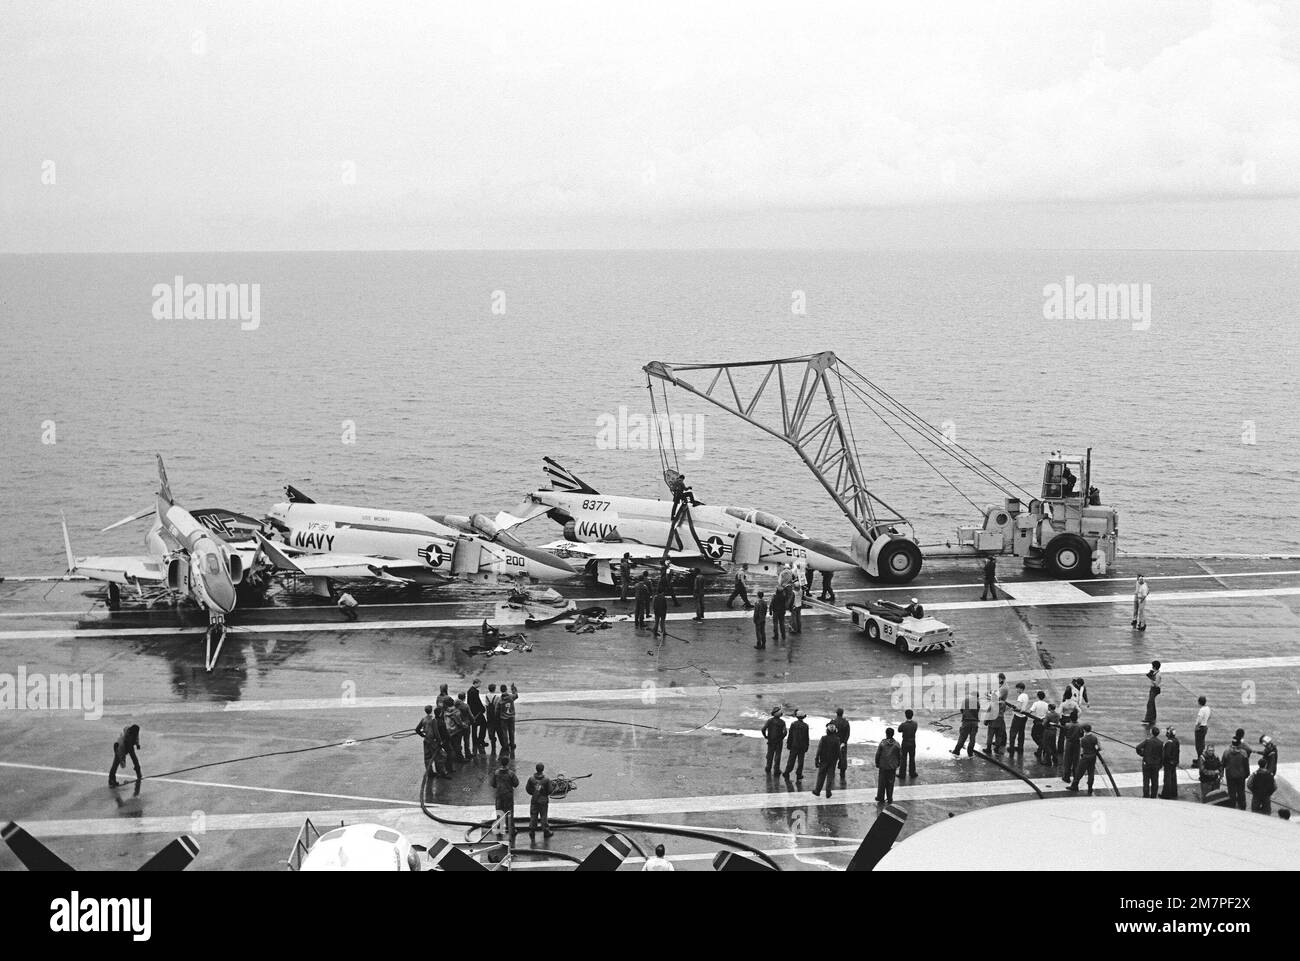 A view of the flight deck of the aircraft carrier USS MIDWAY (CV 41) as ...